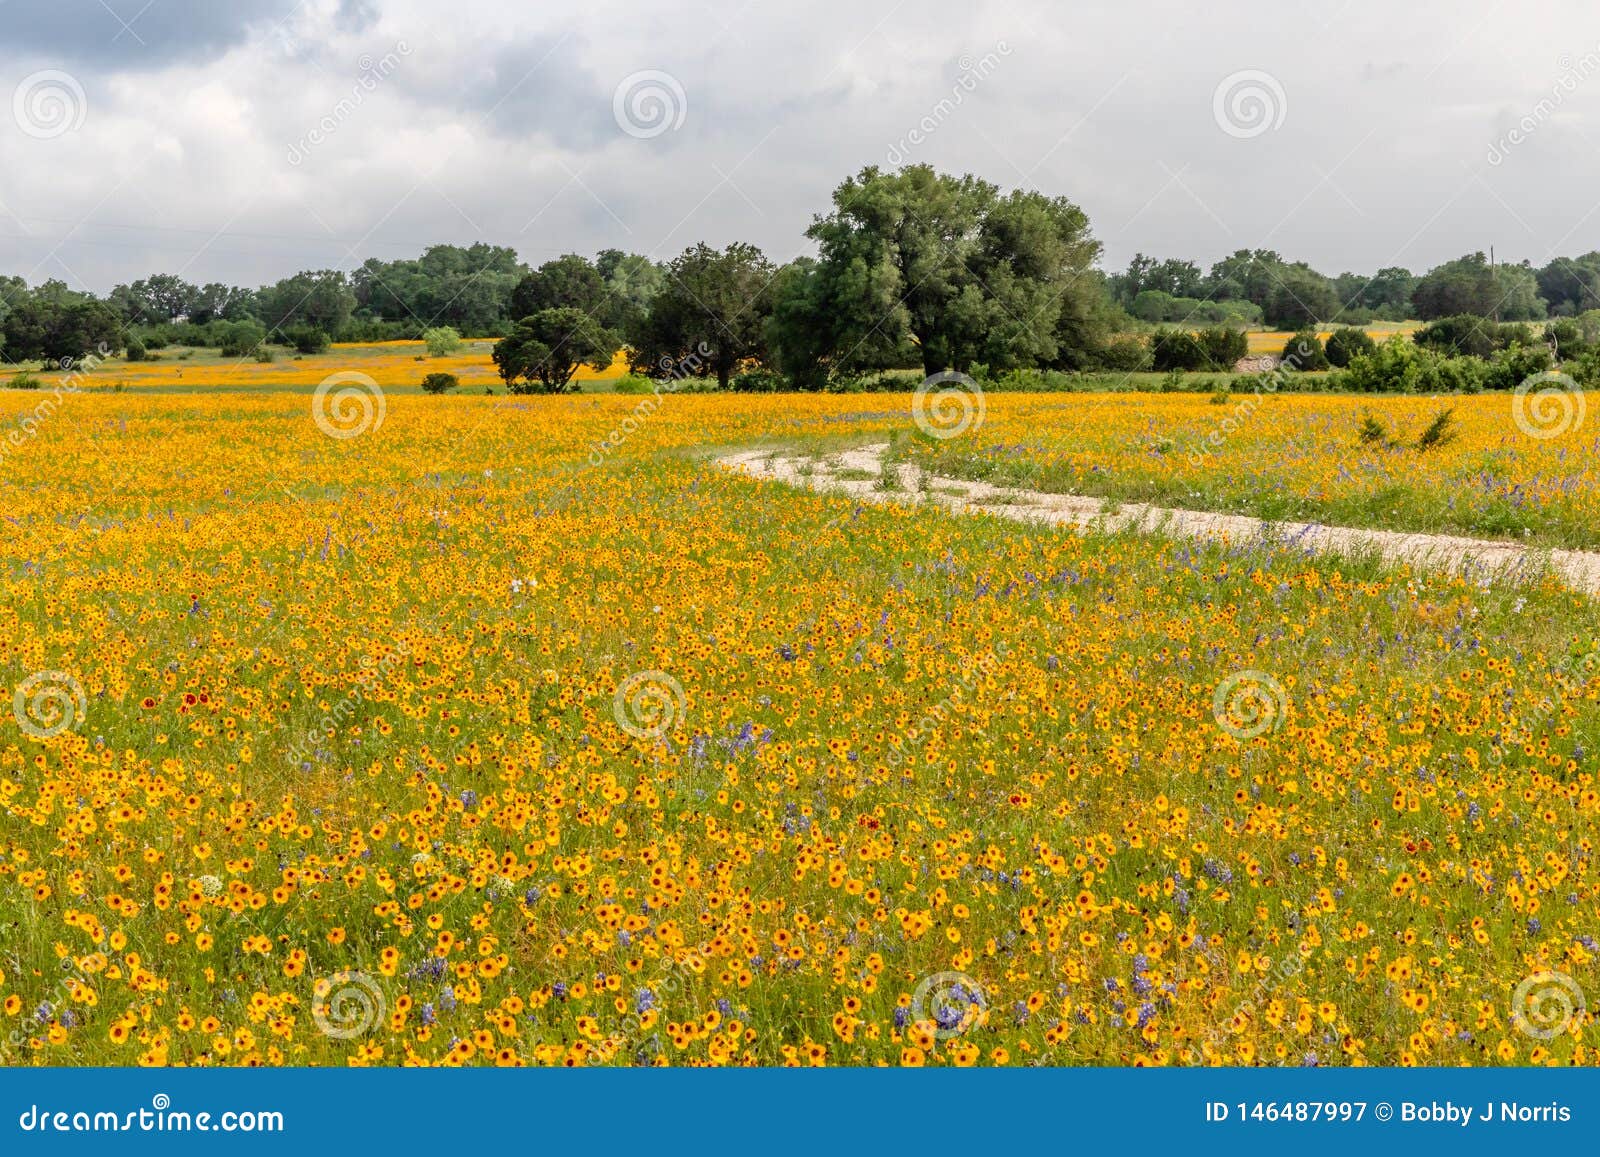 Field Of Texas Hill Country Yellow Wildflowers Stock Image Image Of